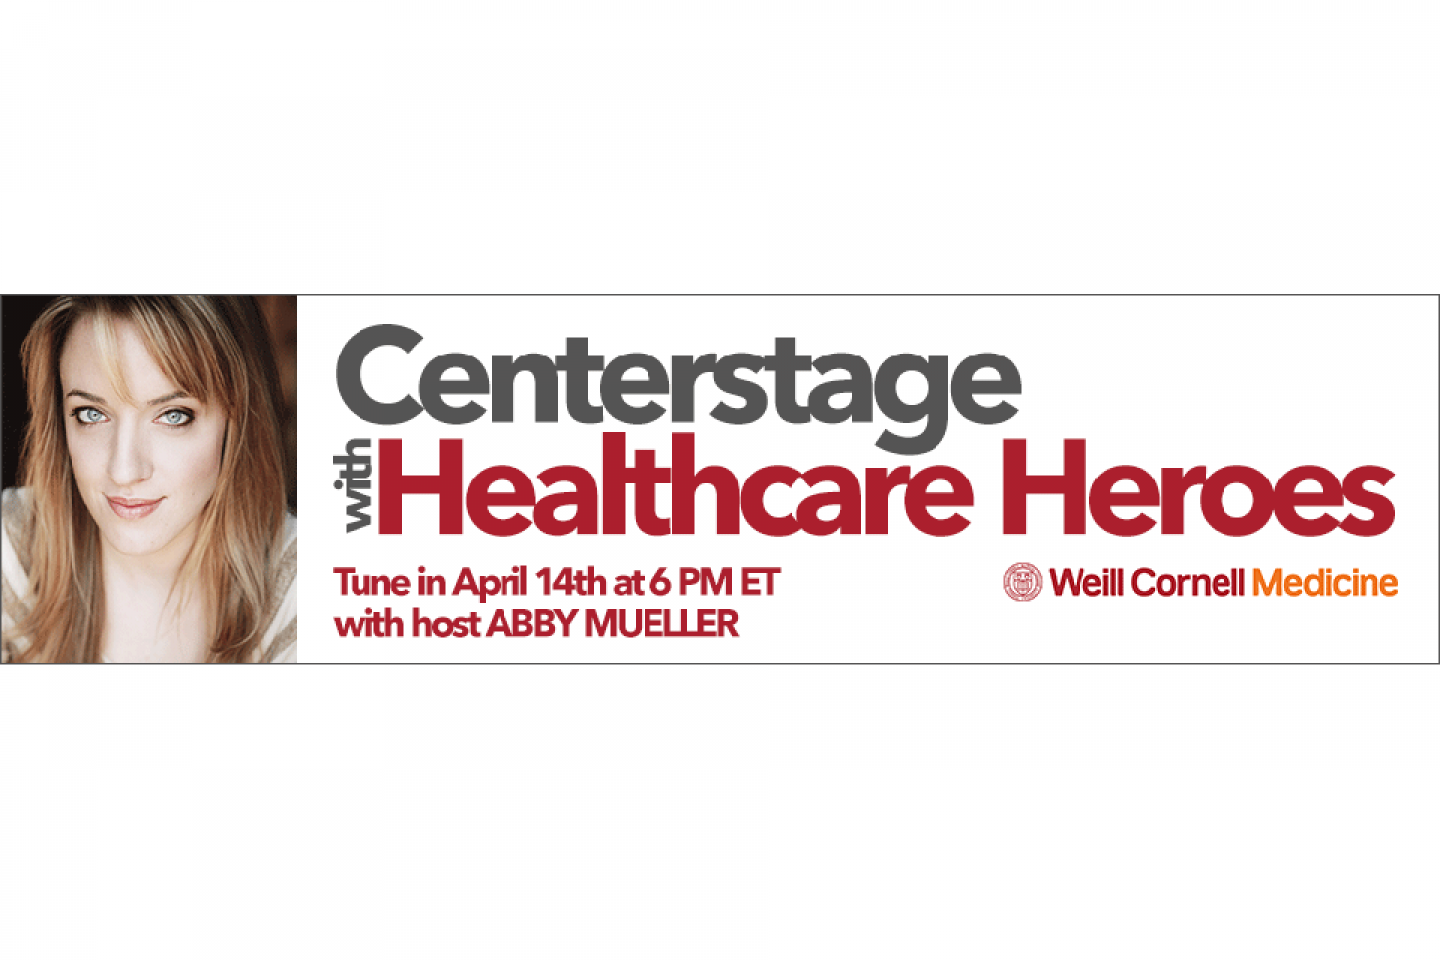 centerstage with healthcare heroes banner with Abby Mueller